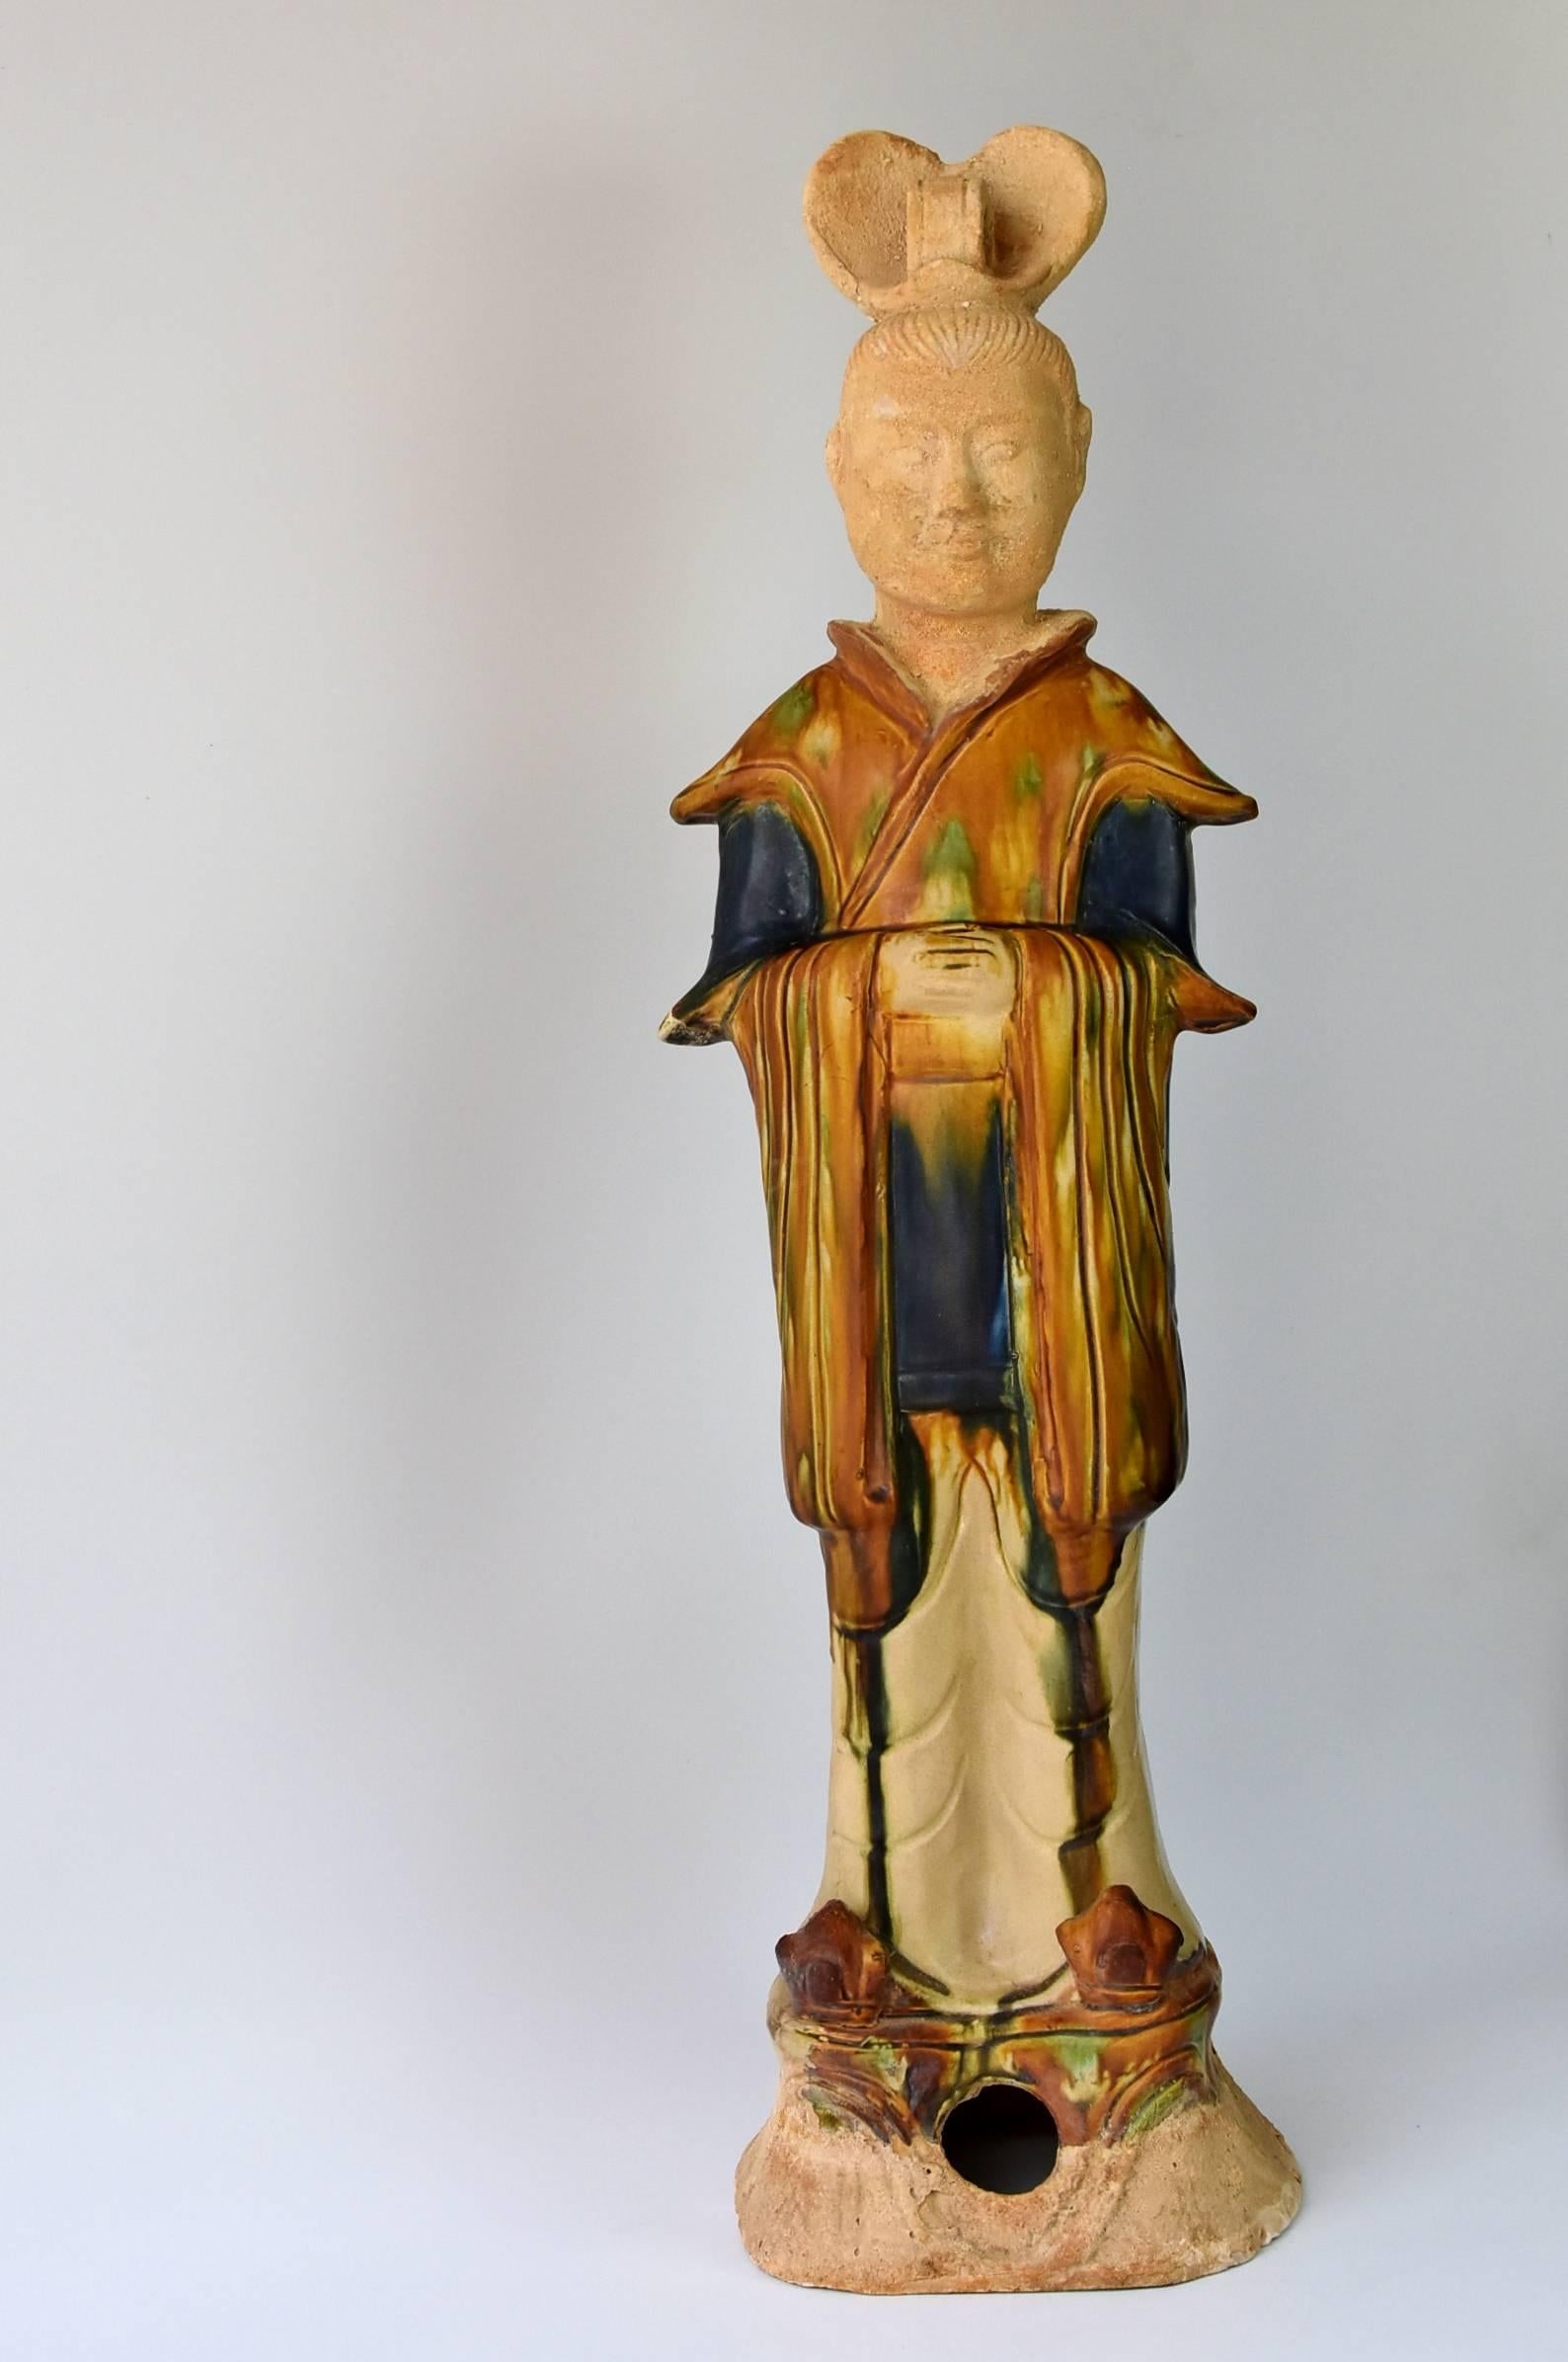 A beautiful, extra tall piece. The statue is of a tang dynasty court official. His robe and crown are beautifully done, using the Classic colors of caramel, blue and beige with green spots, the famed 